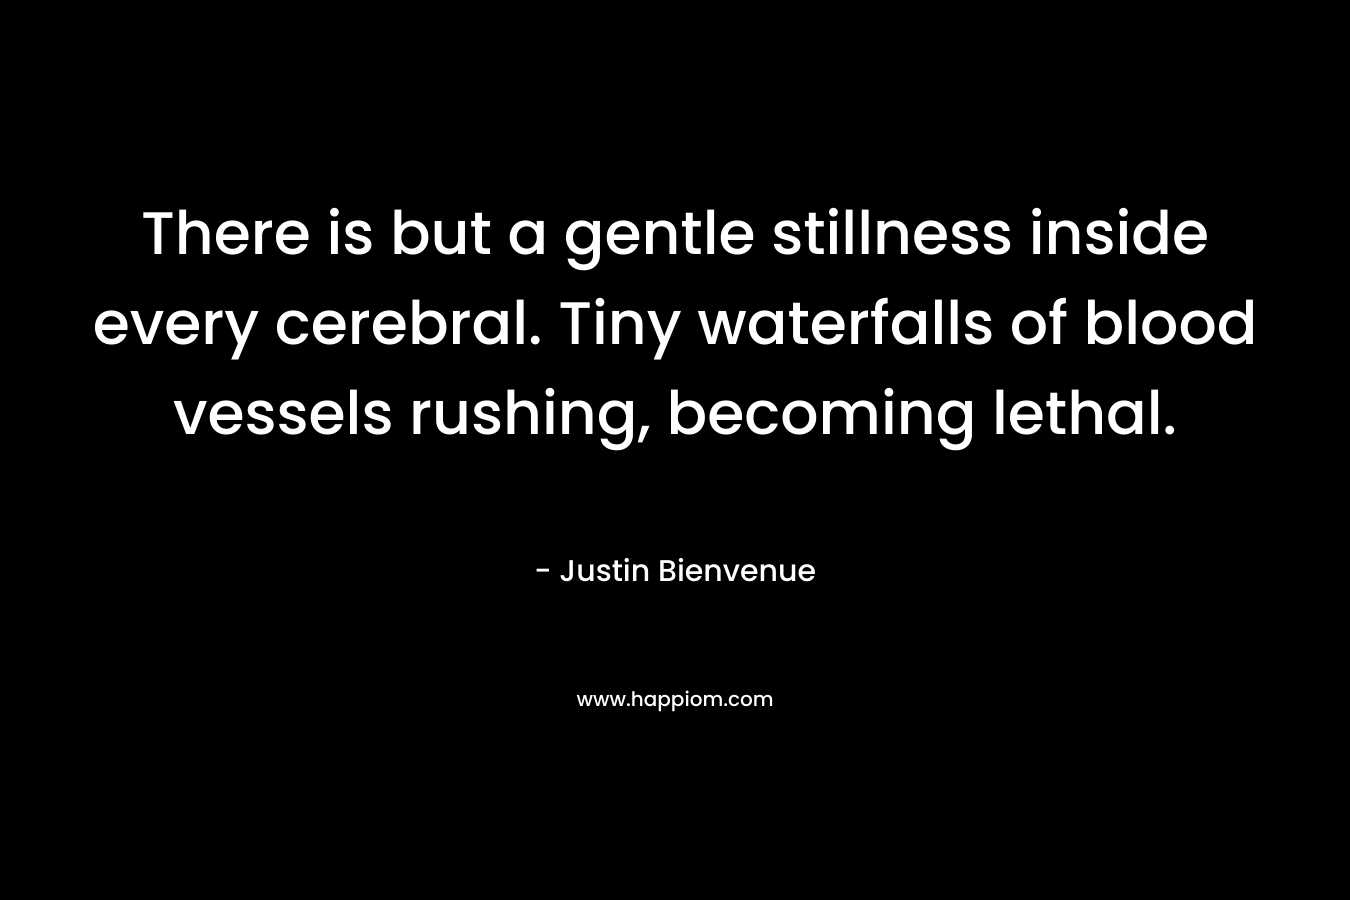 There is but a gentle stillness inside every cerebral. Tiny waterfalls of blood vessels rushing, becoming lethal. – Justin Bienvenue